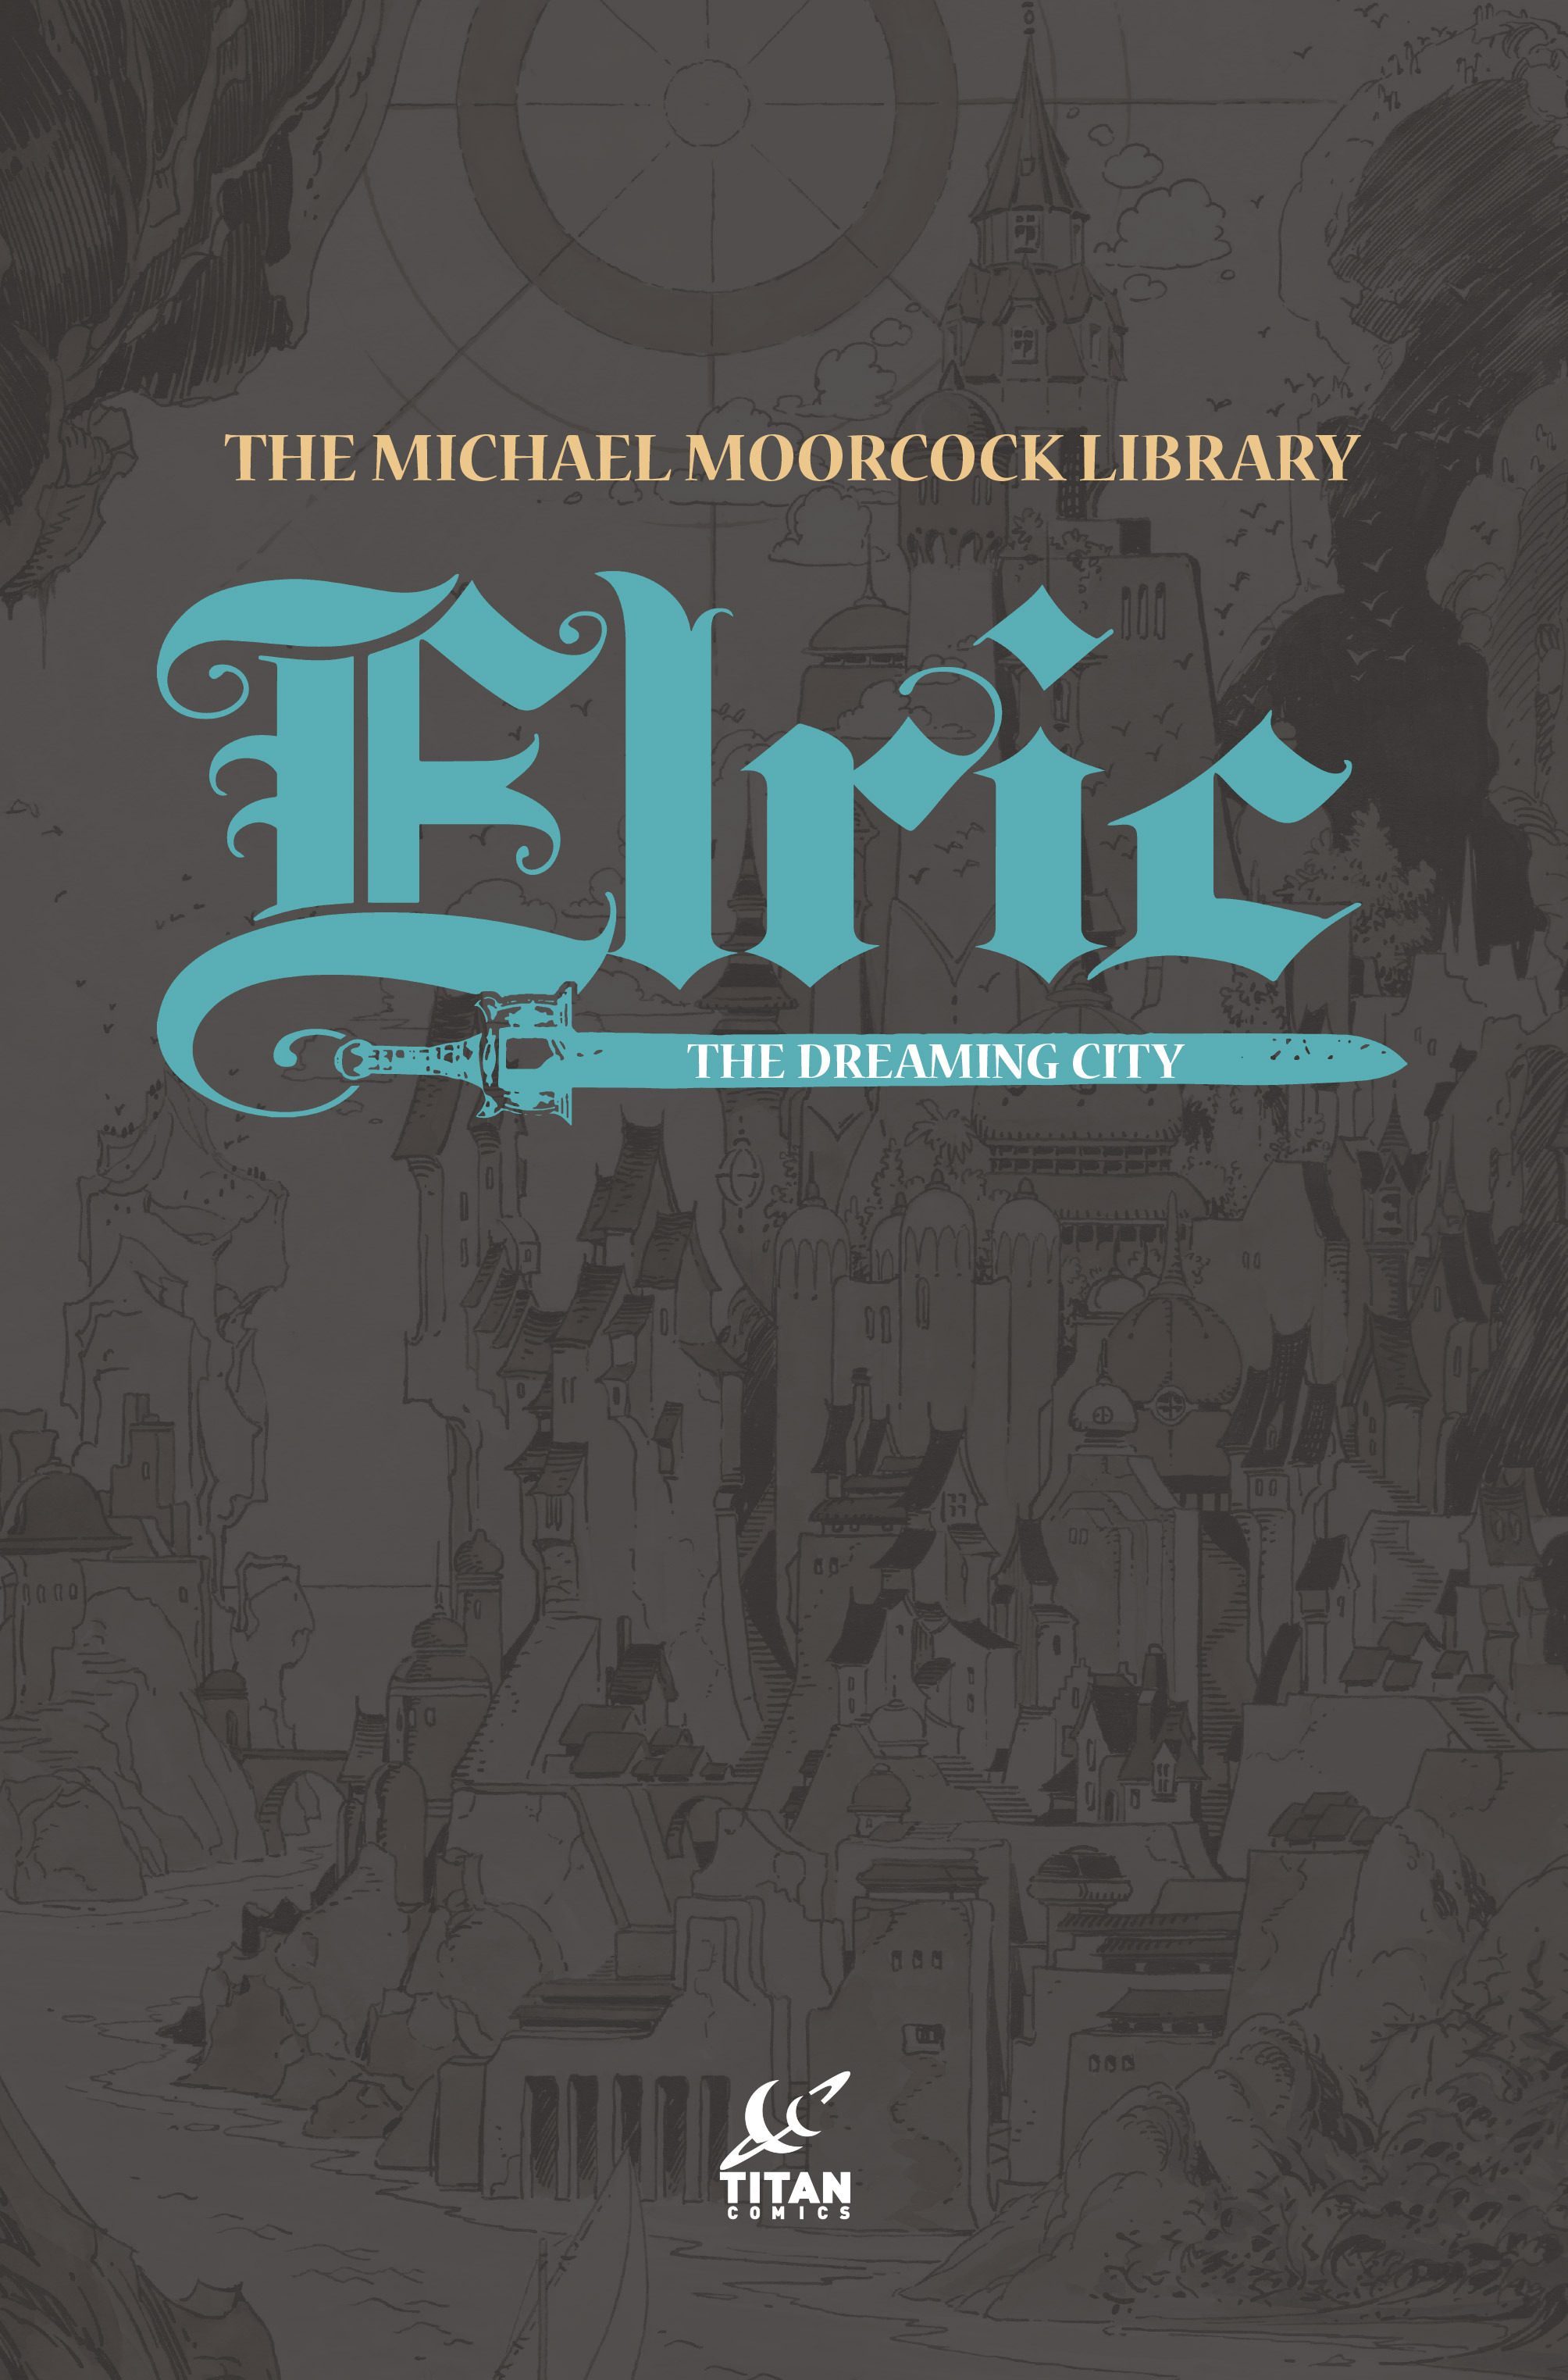 Read online The Michael Moorcock Library comic -  Issue # TPB 3 - 2